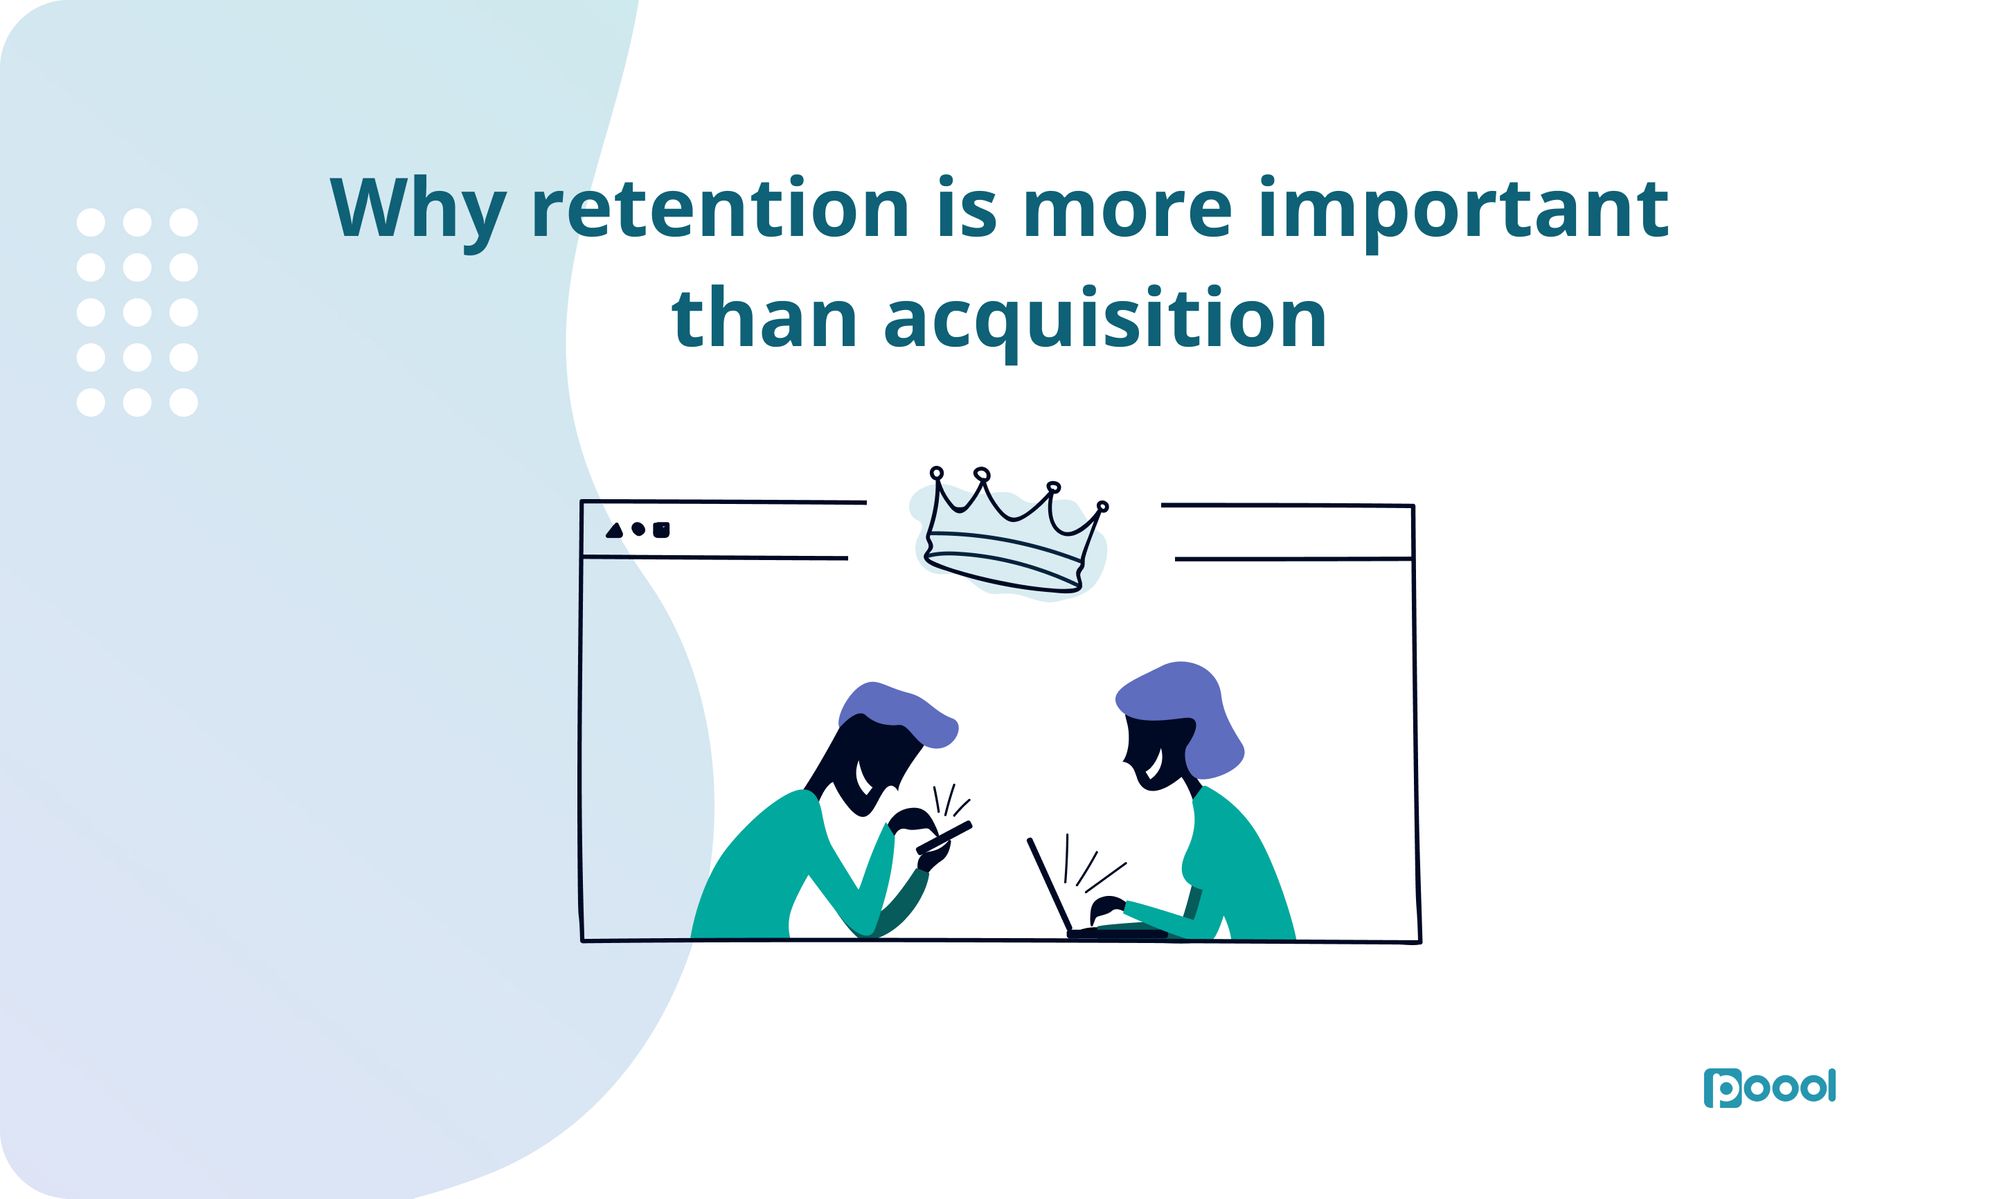 Why retention is more important than acquisition.